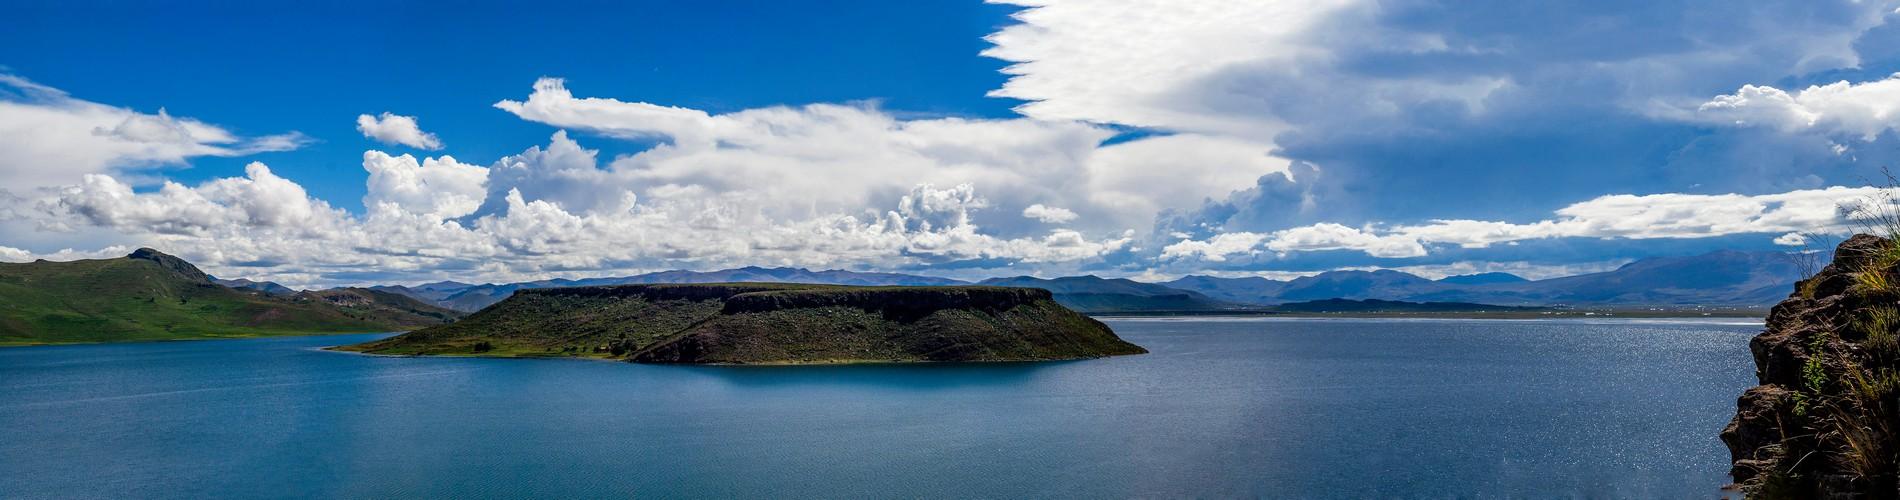 Why You Should Visit The Islands of Lake Titicaca